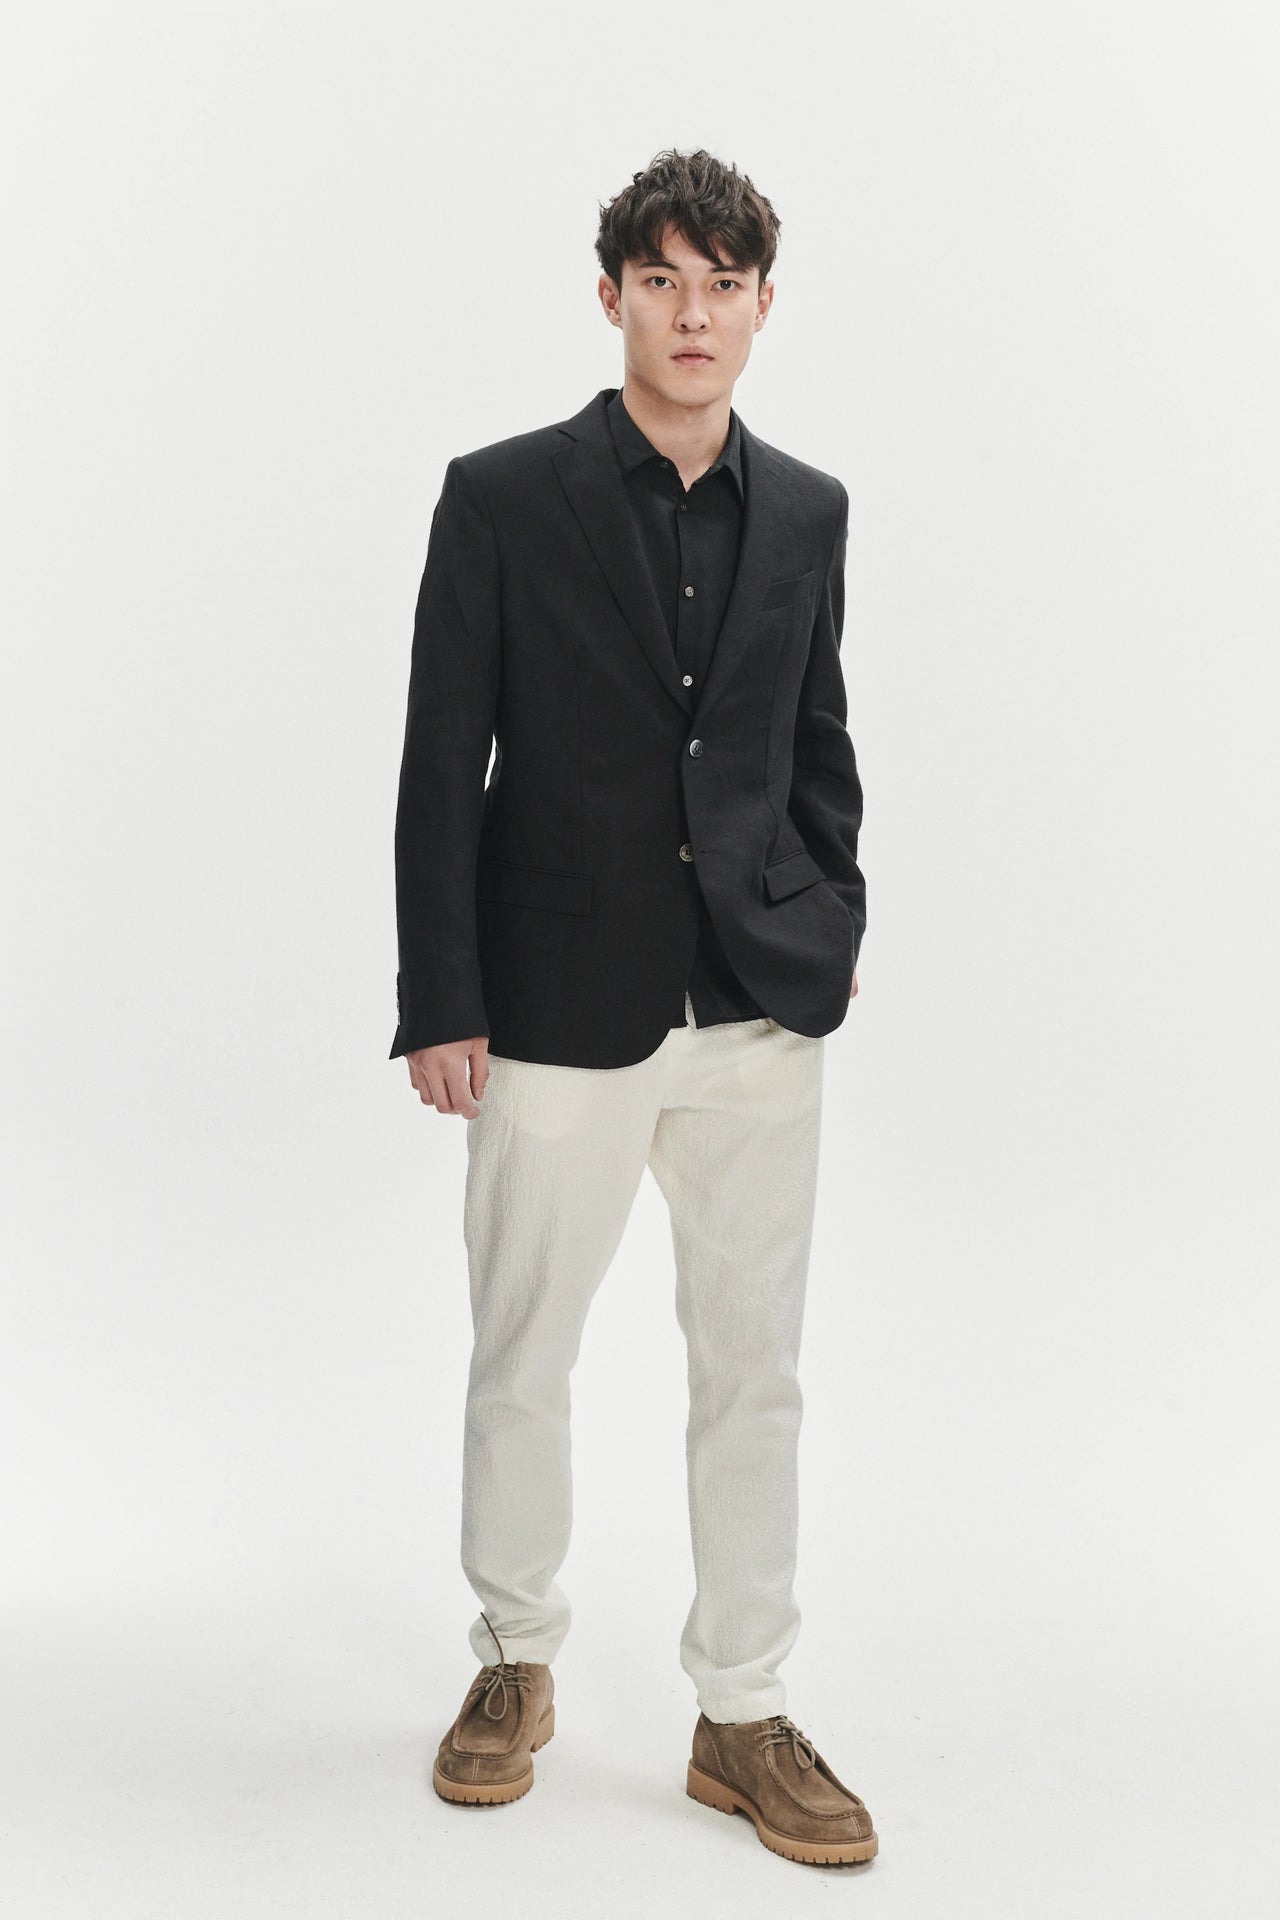 Relaxed Jacket in a Black Pure Linen with Cotton Lining